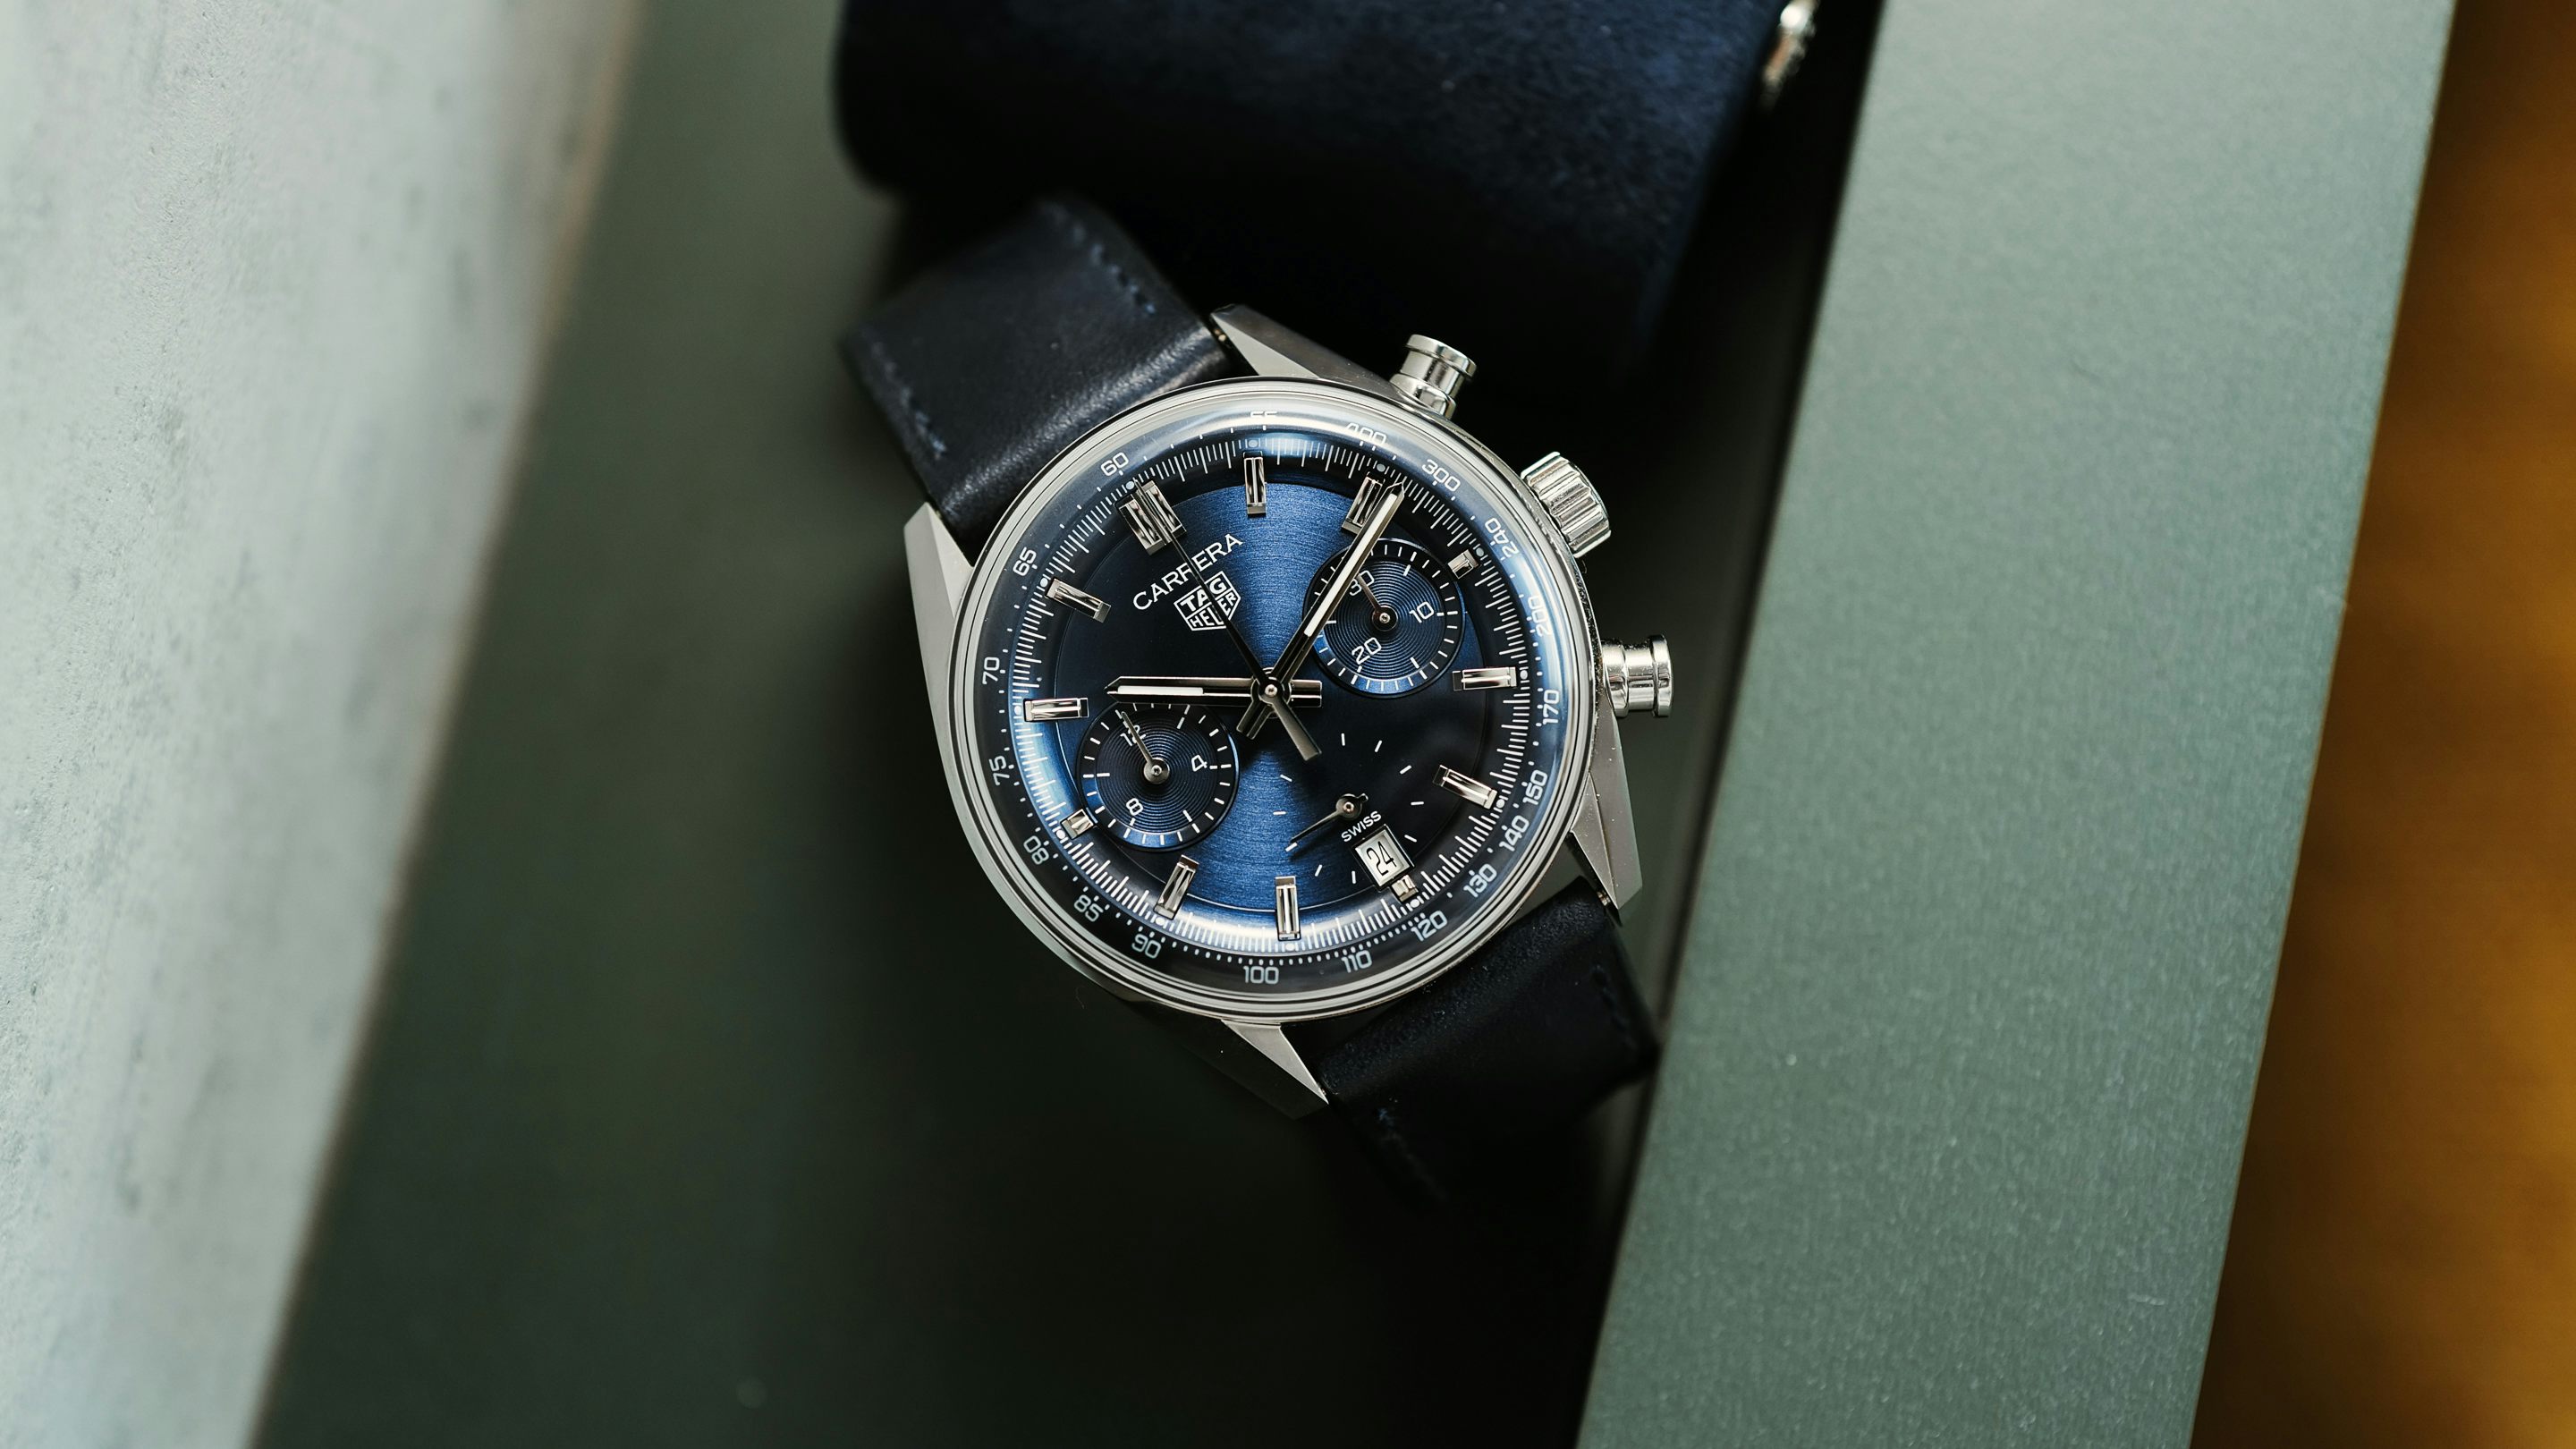 Introducing New Variations Of The TAG Heuer Carrera Chronograph